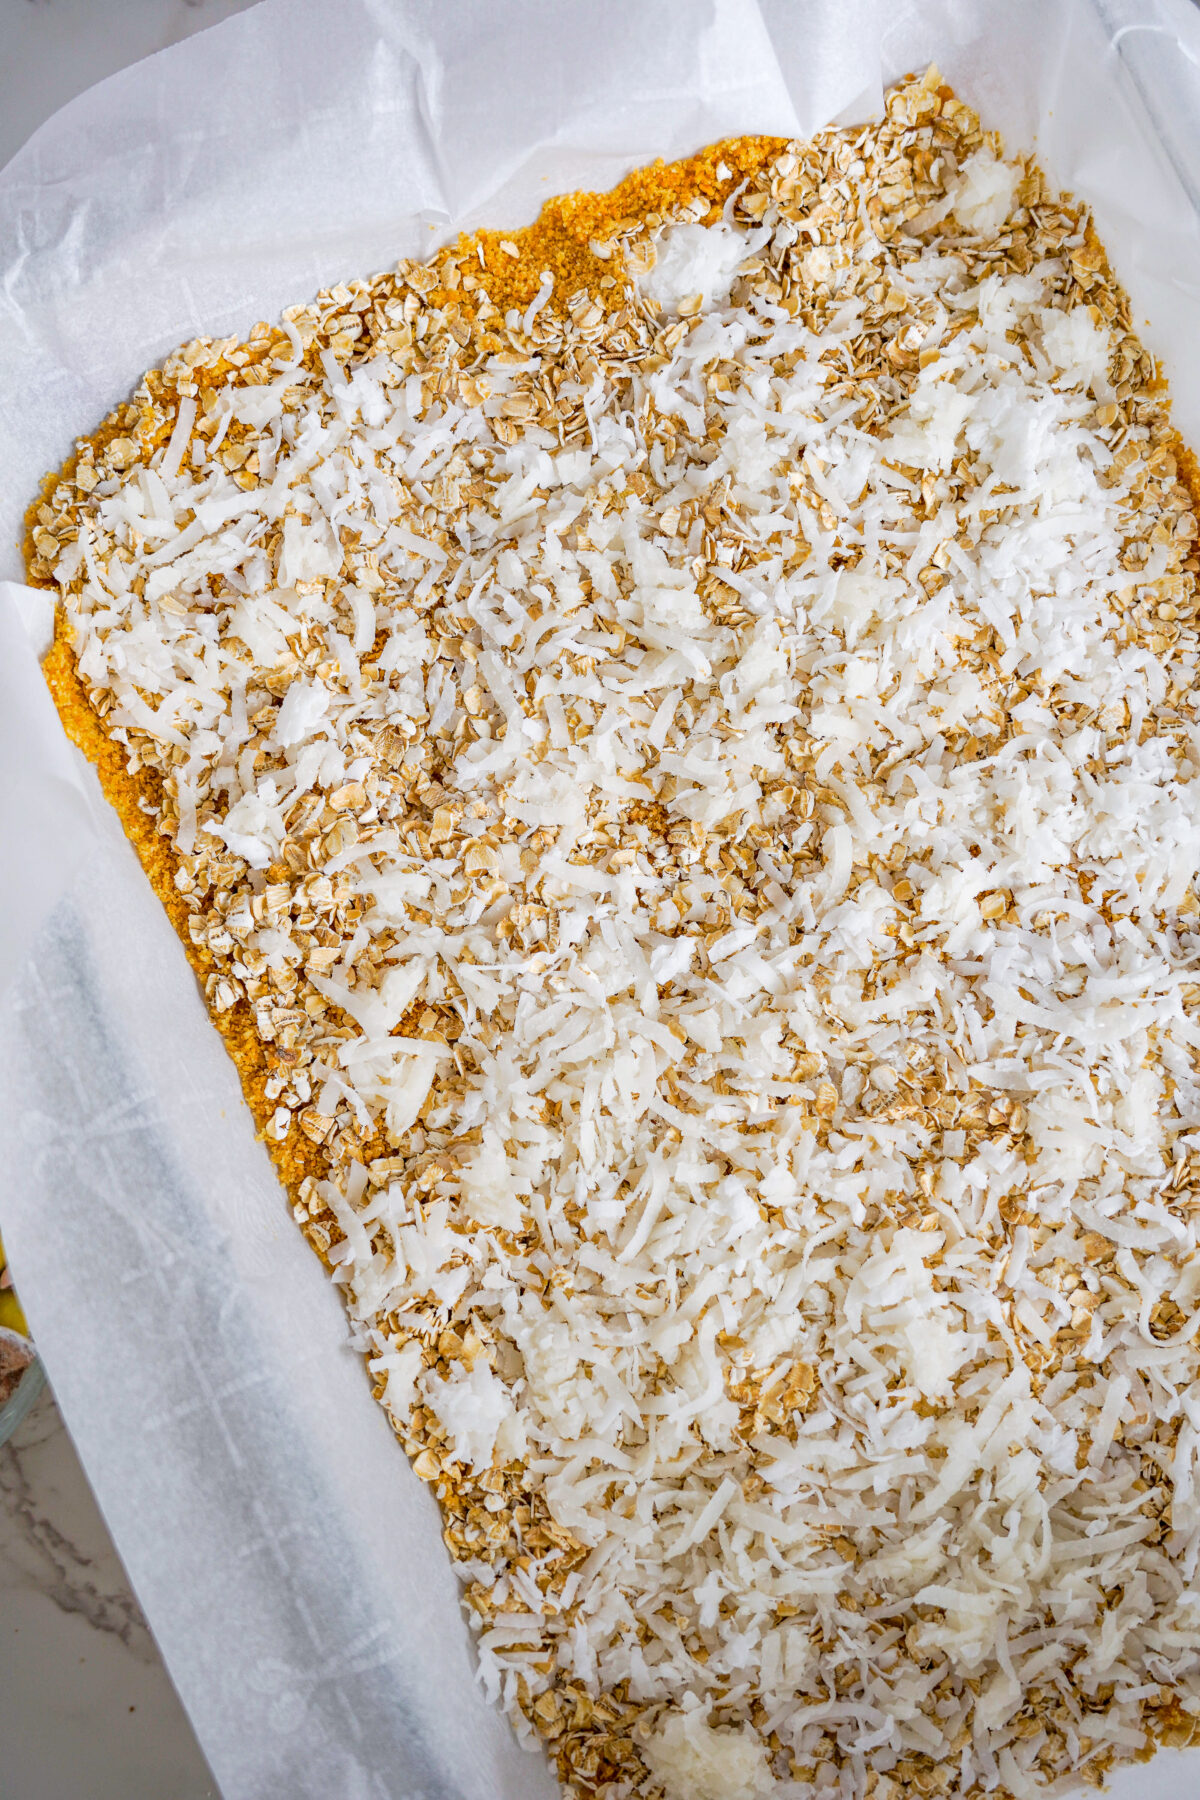 Oats and coconut flakes sprinkled over the crust.